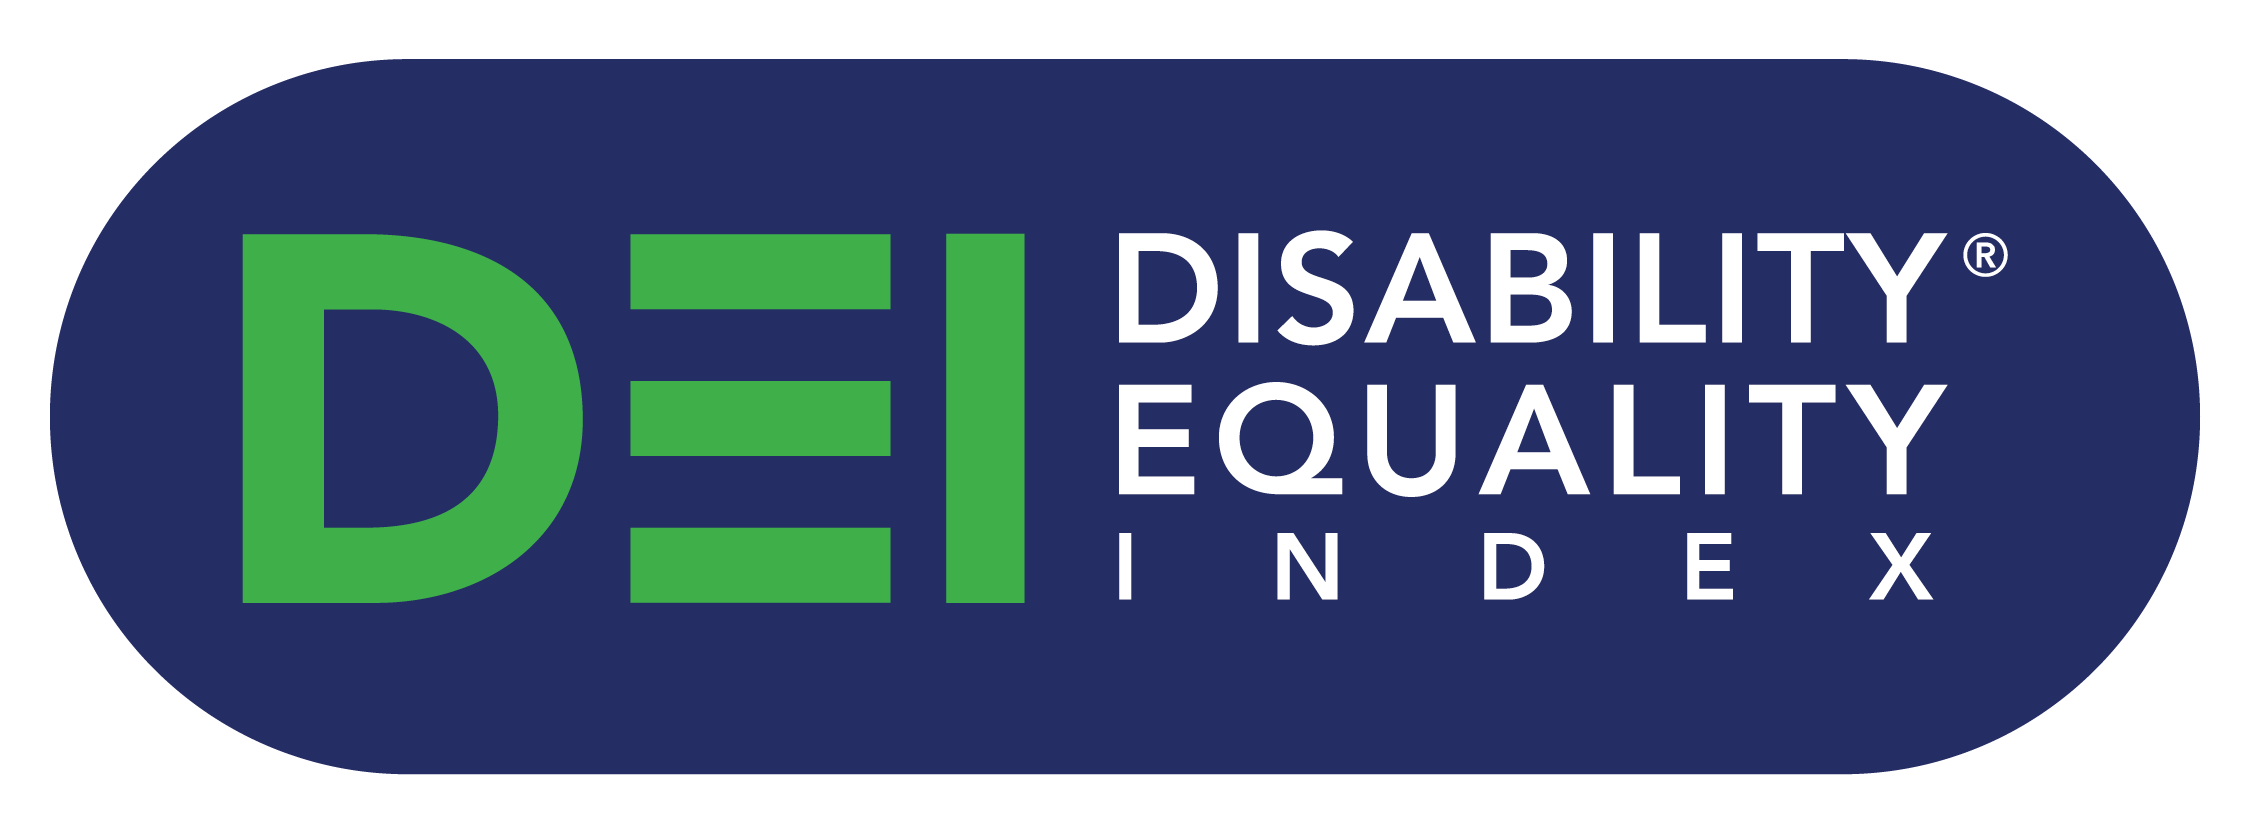 Disability Equality Index®